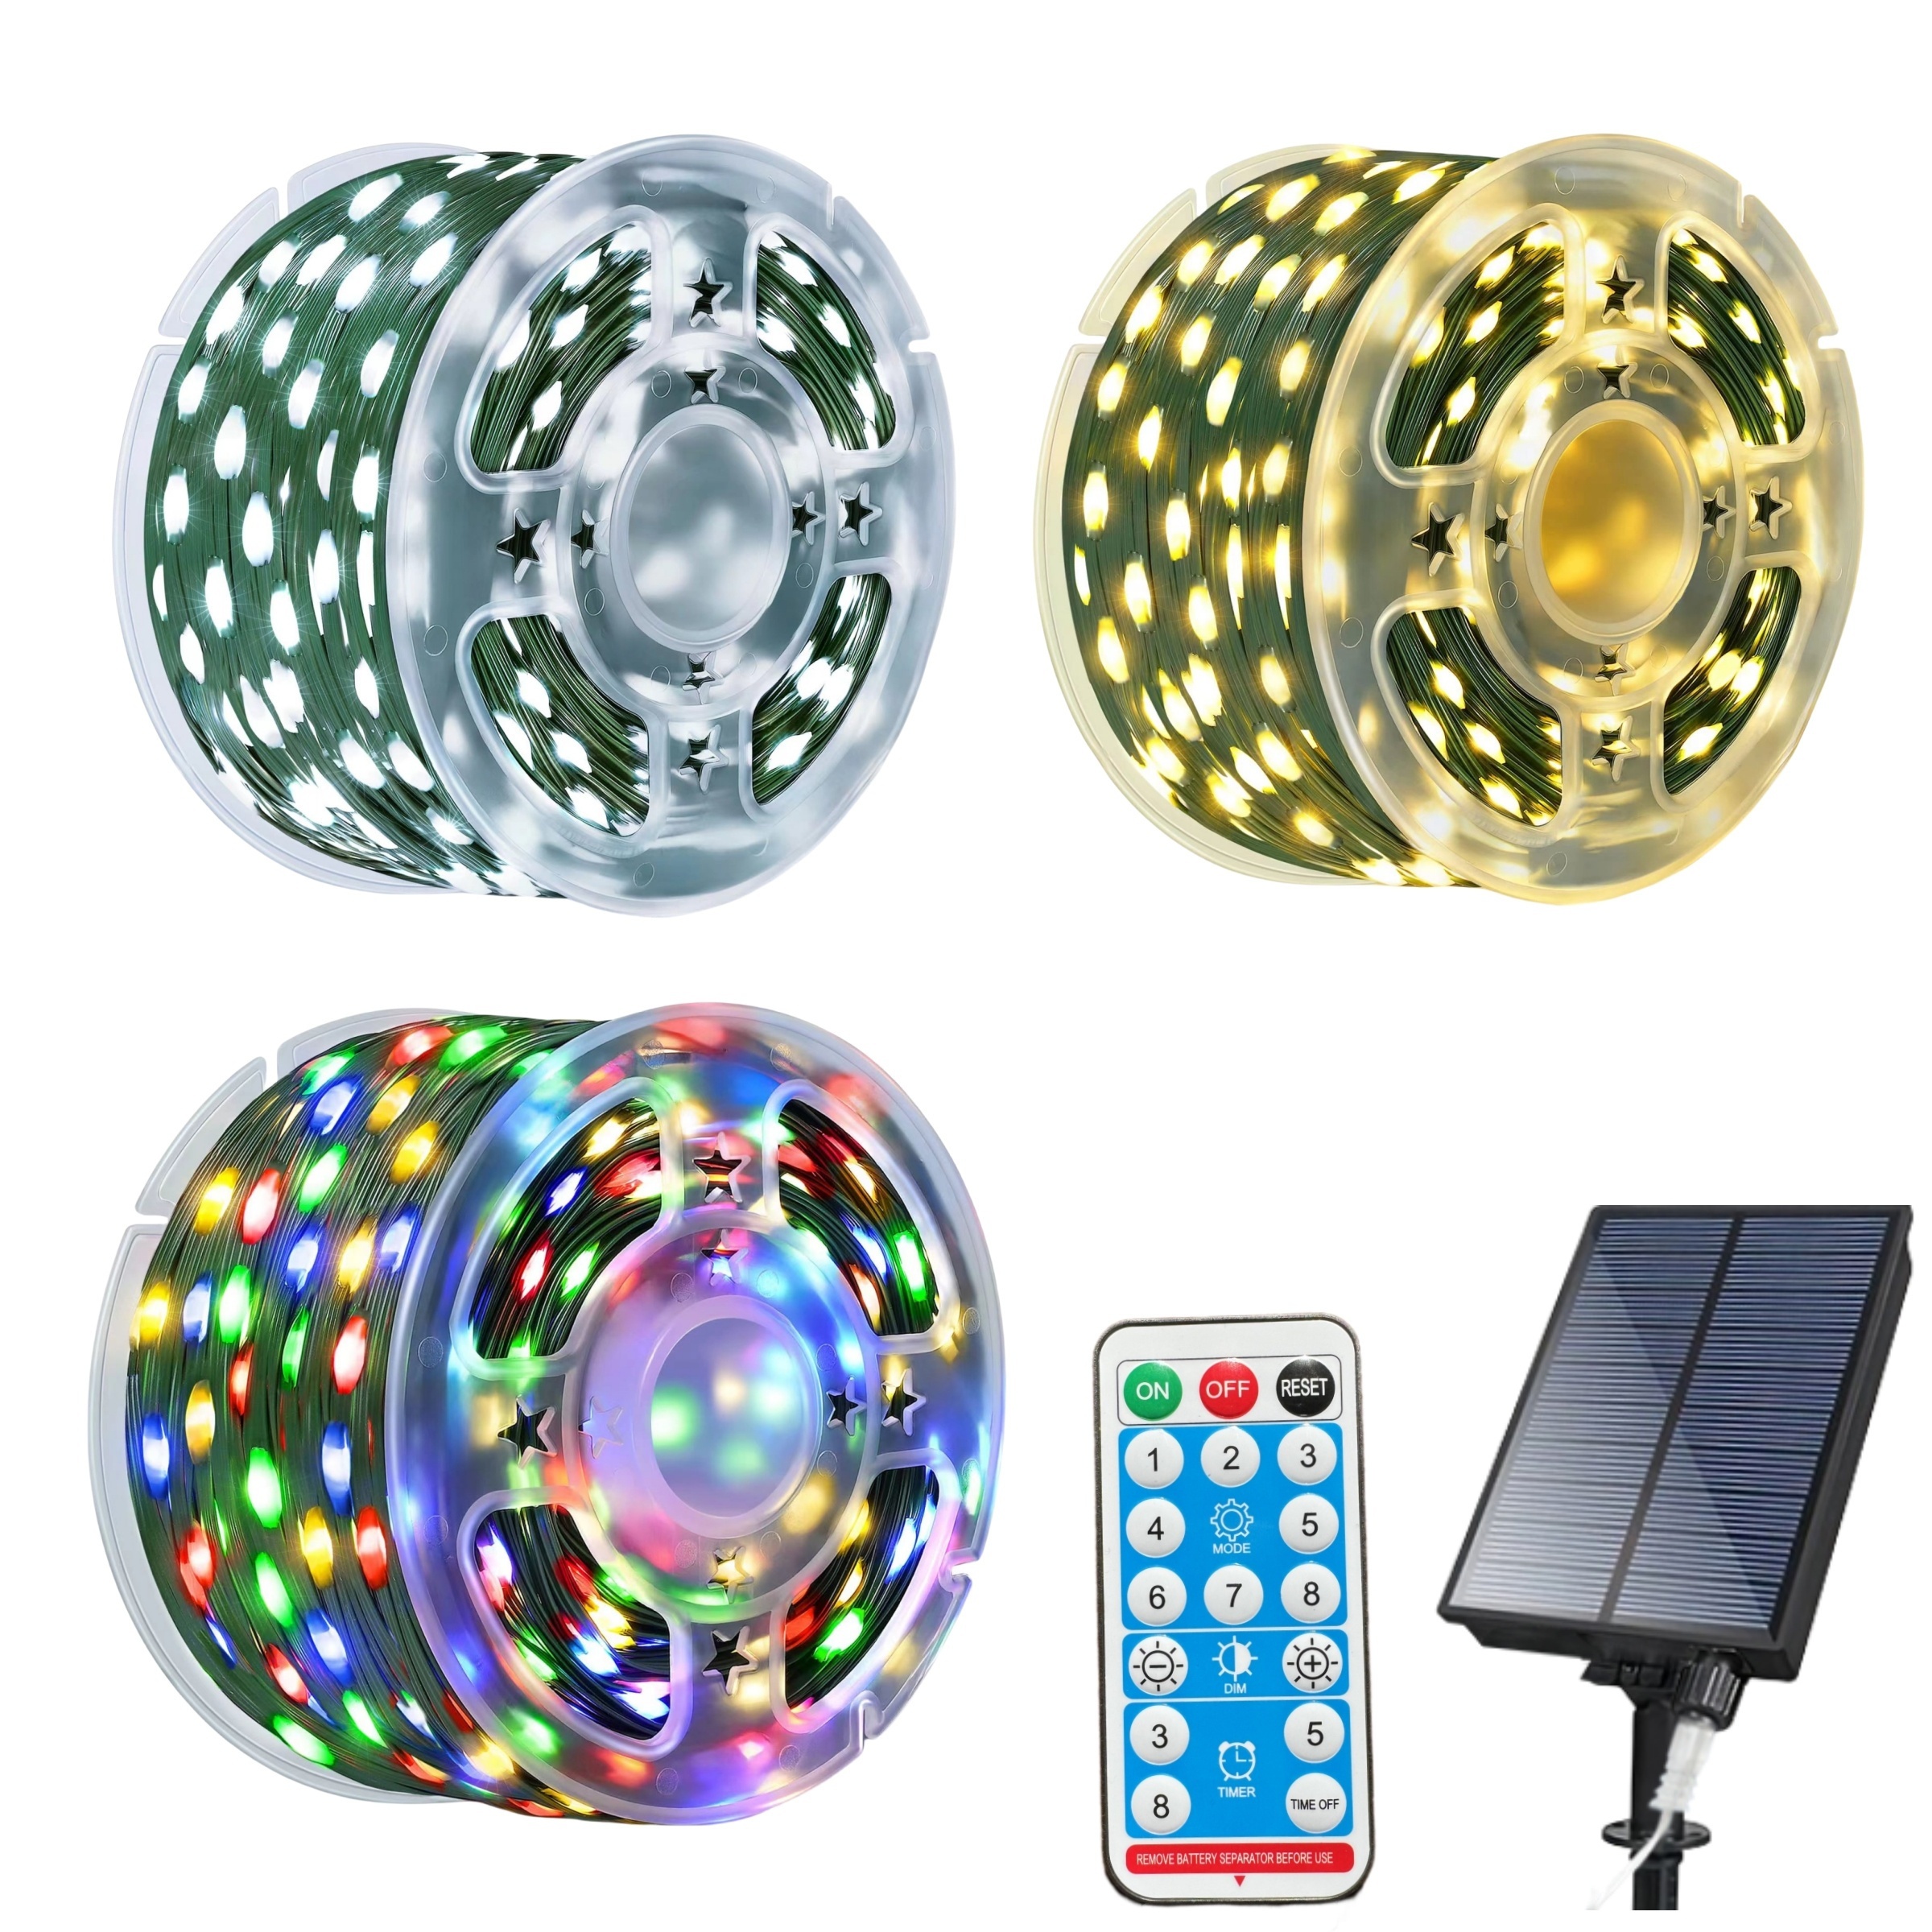 

remote-operated" 110ft Solar-powered Christmas Lights With 300 Leds - Waterproof Outdoor Fairy Lights, 8 Modes, Remote Control & Timer, Multi-color, Perfect For Yard & House Decor